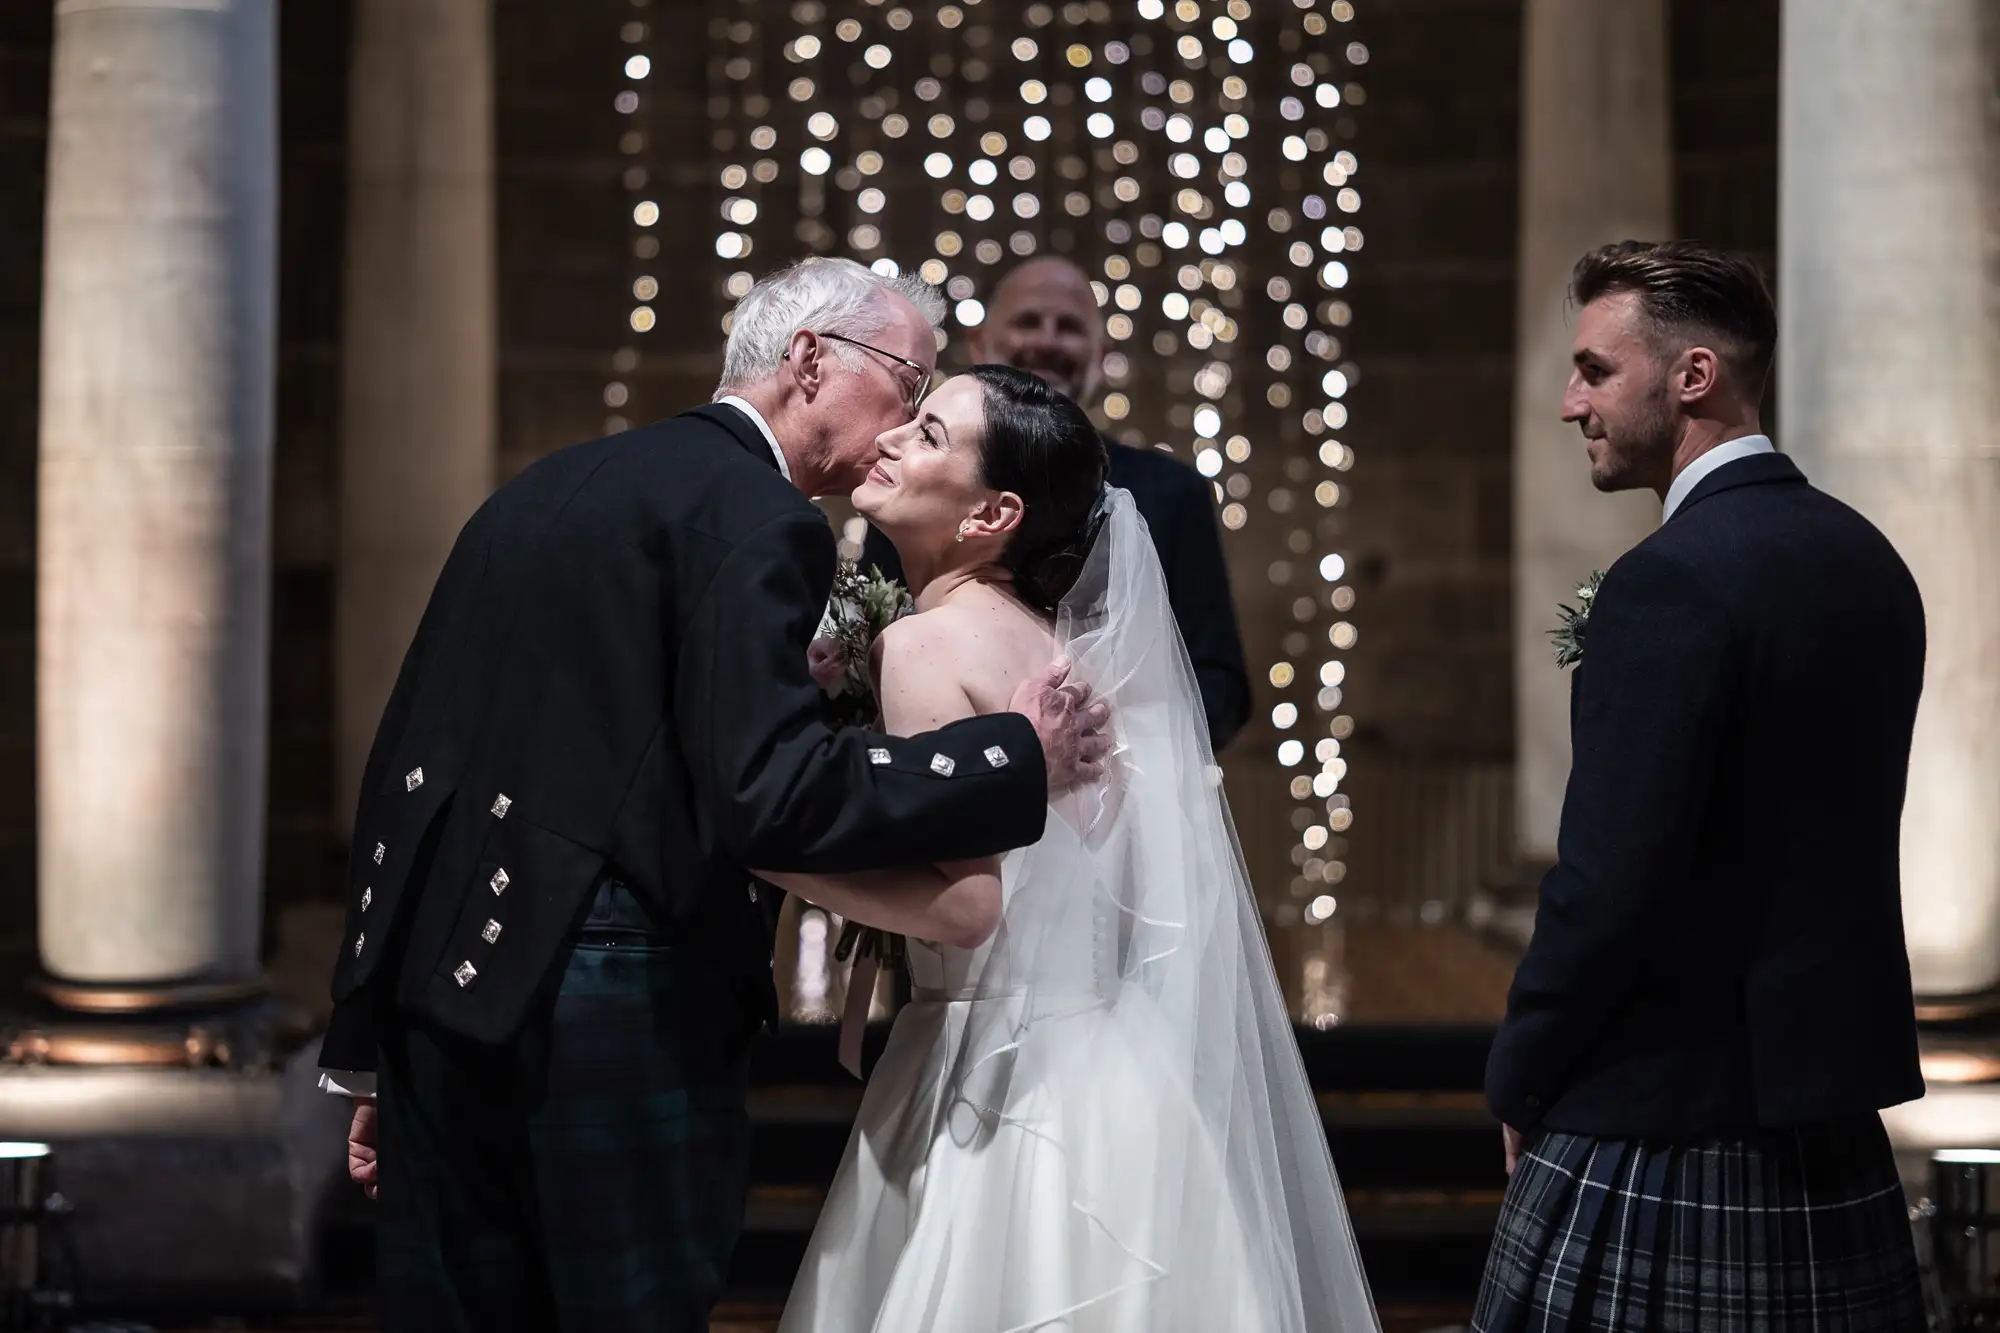 An elderly man in a kilt kisses the cheek of a bride in a white dress, while a groom in a kilt watches, all against a background of twinkling lights in a grand hall.